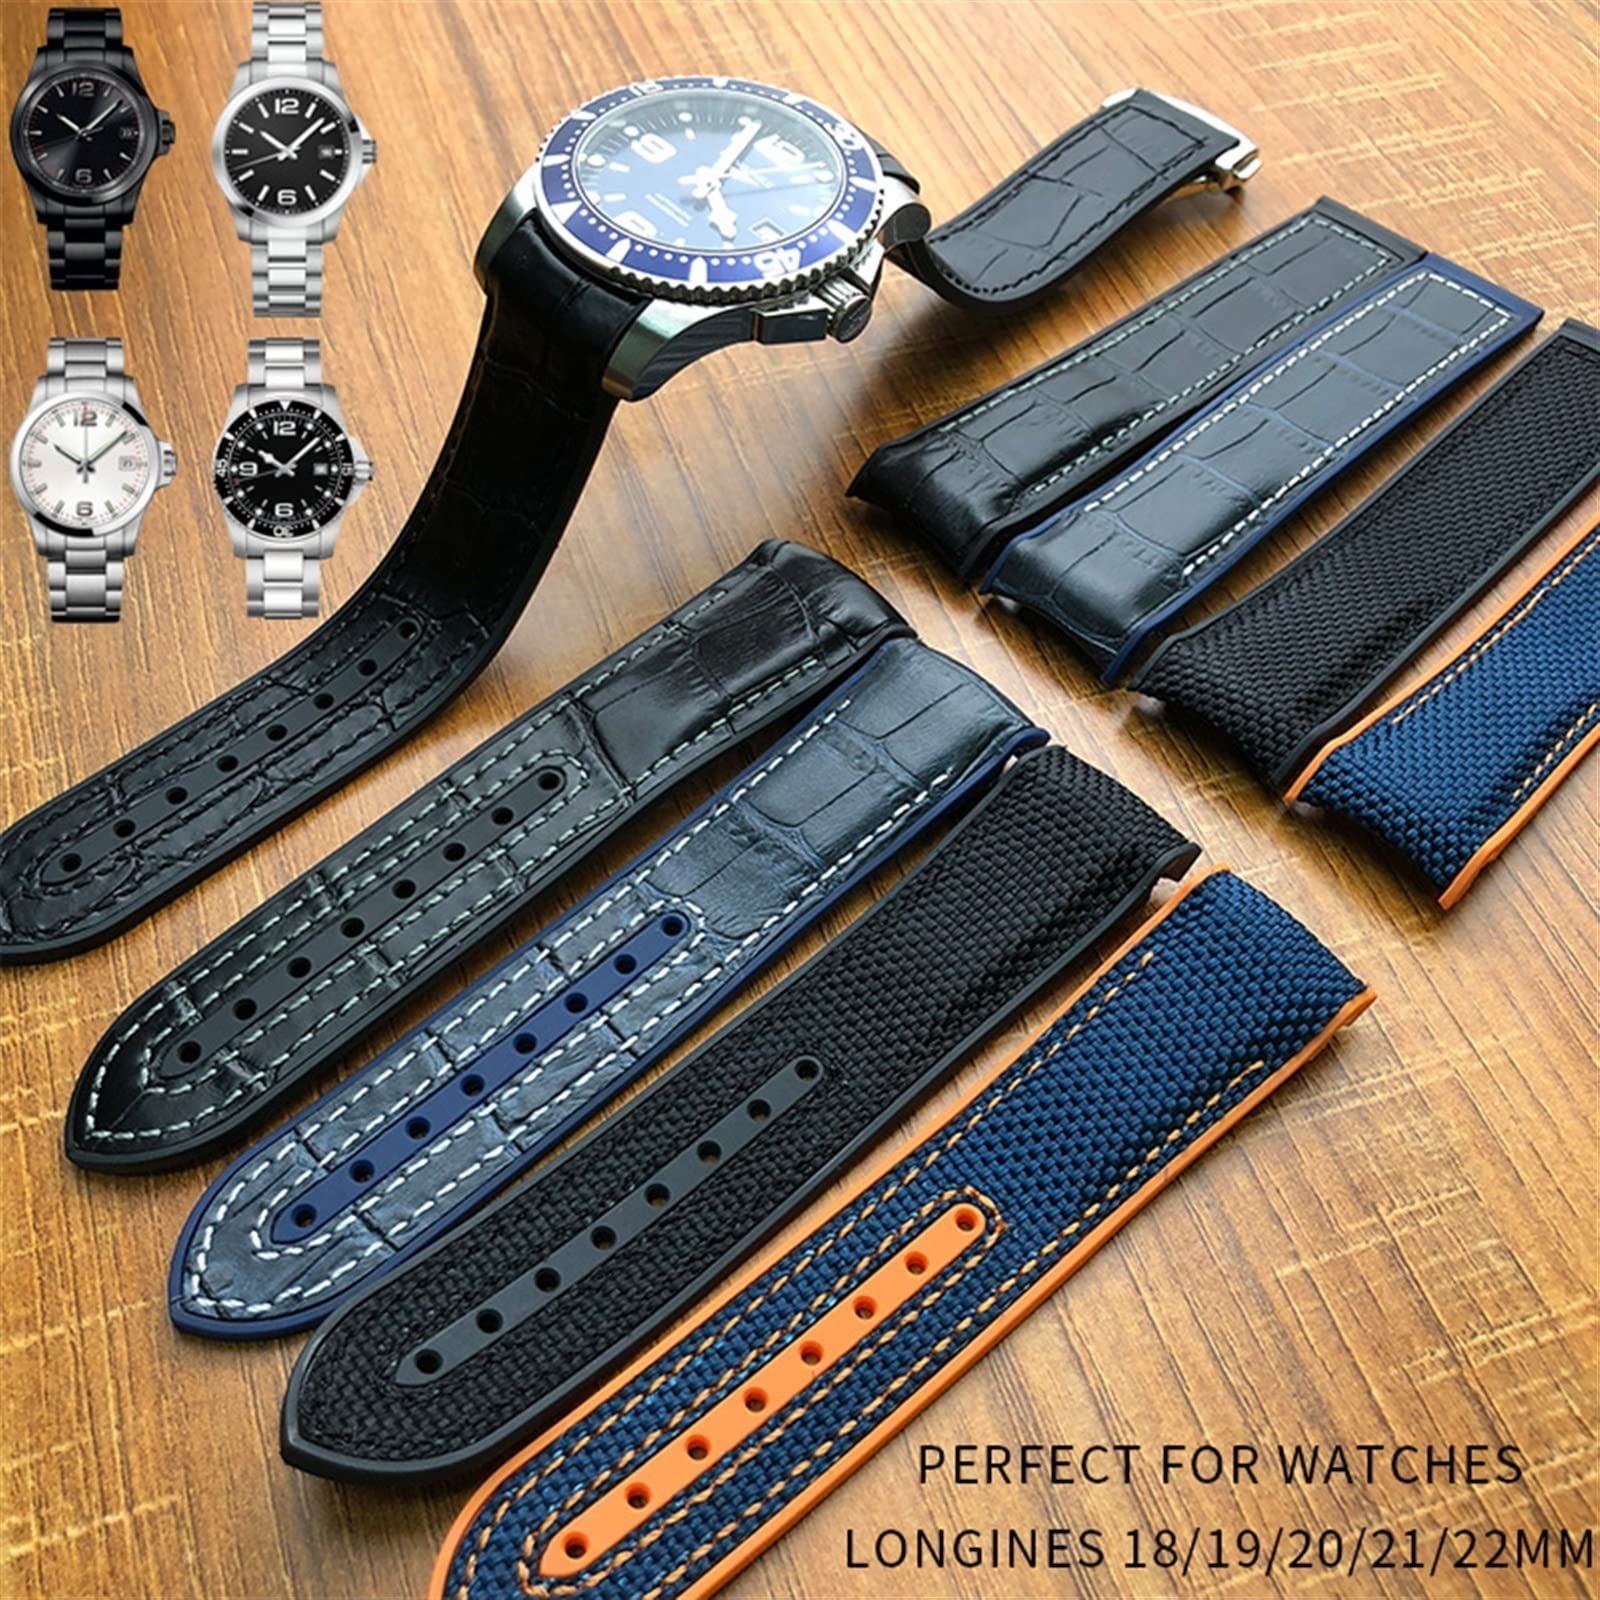 JWTPRO 19mm 20mm Nylon Rubber Watchband 21mm 22mm for Omega Seamaster 300 AT150 Speedmaster 8900 PlanetOcean Seiko Leather Strap (Color : Blue Nylon Bule, Size : 22mm)